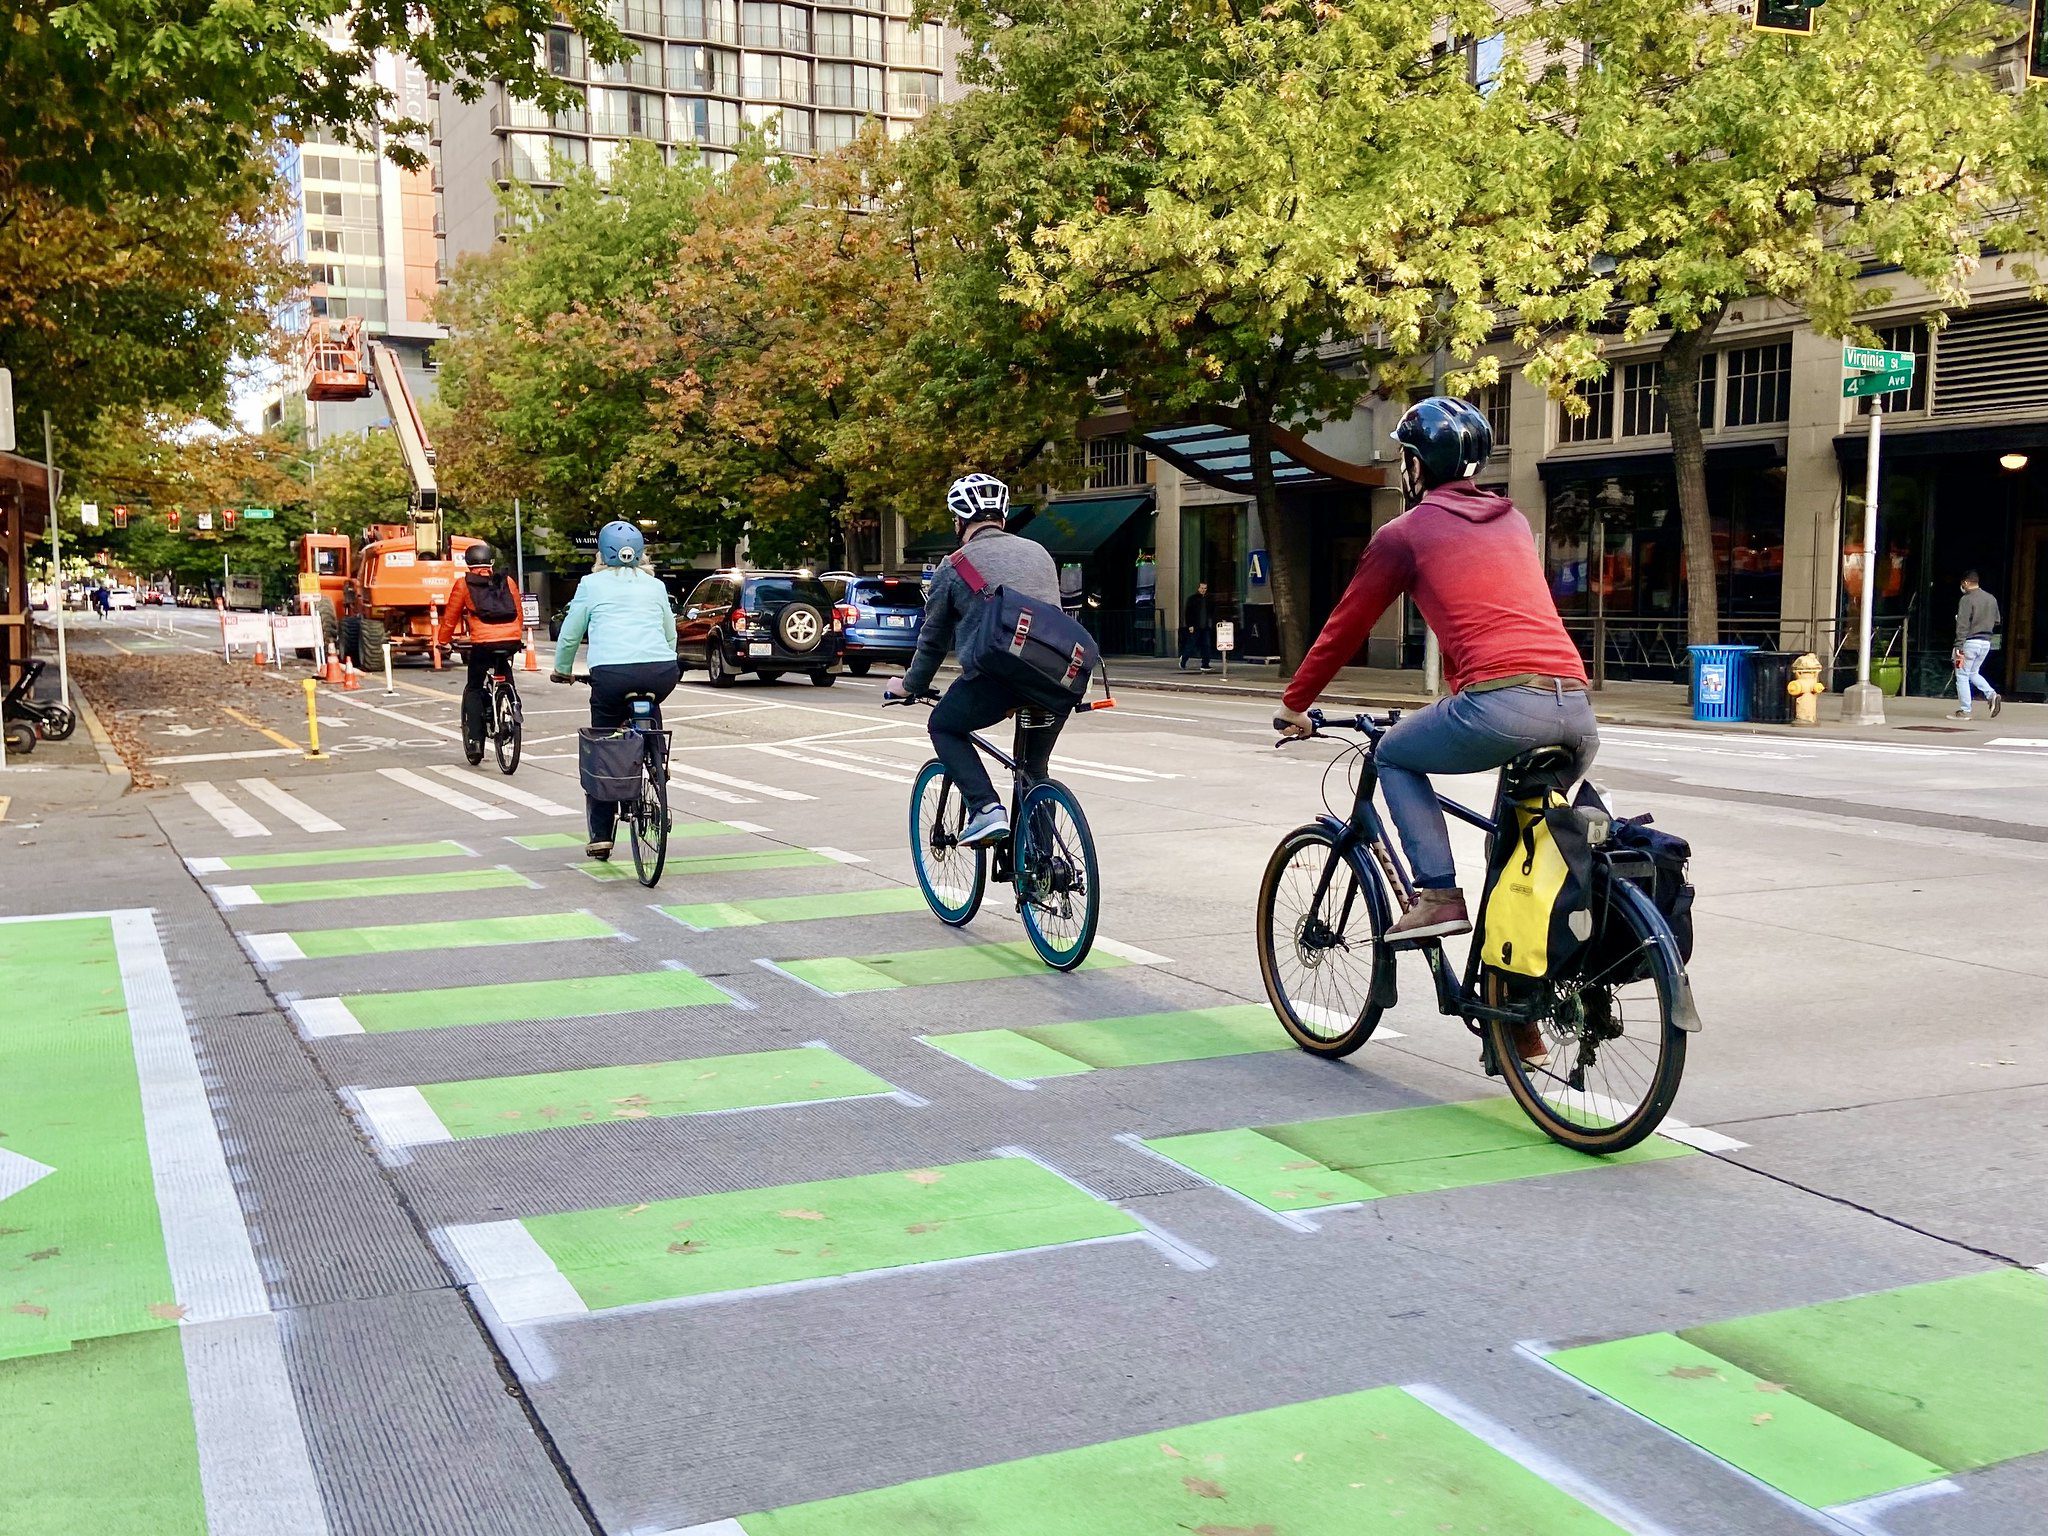 People bike along 4th Ave in downtown Seattle and the Belltown neighborhood, on a sunny day. Large trees are in the background, and painted green protected bike lane in the foreground.